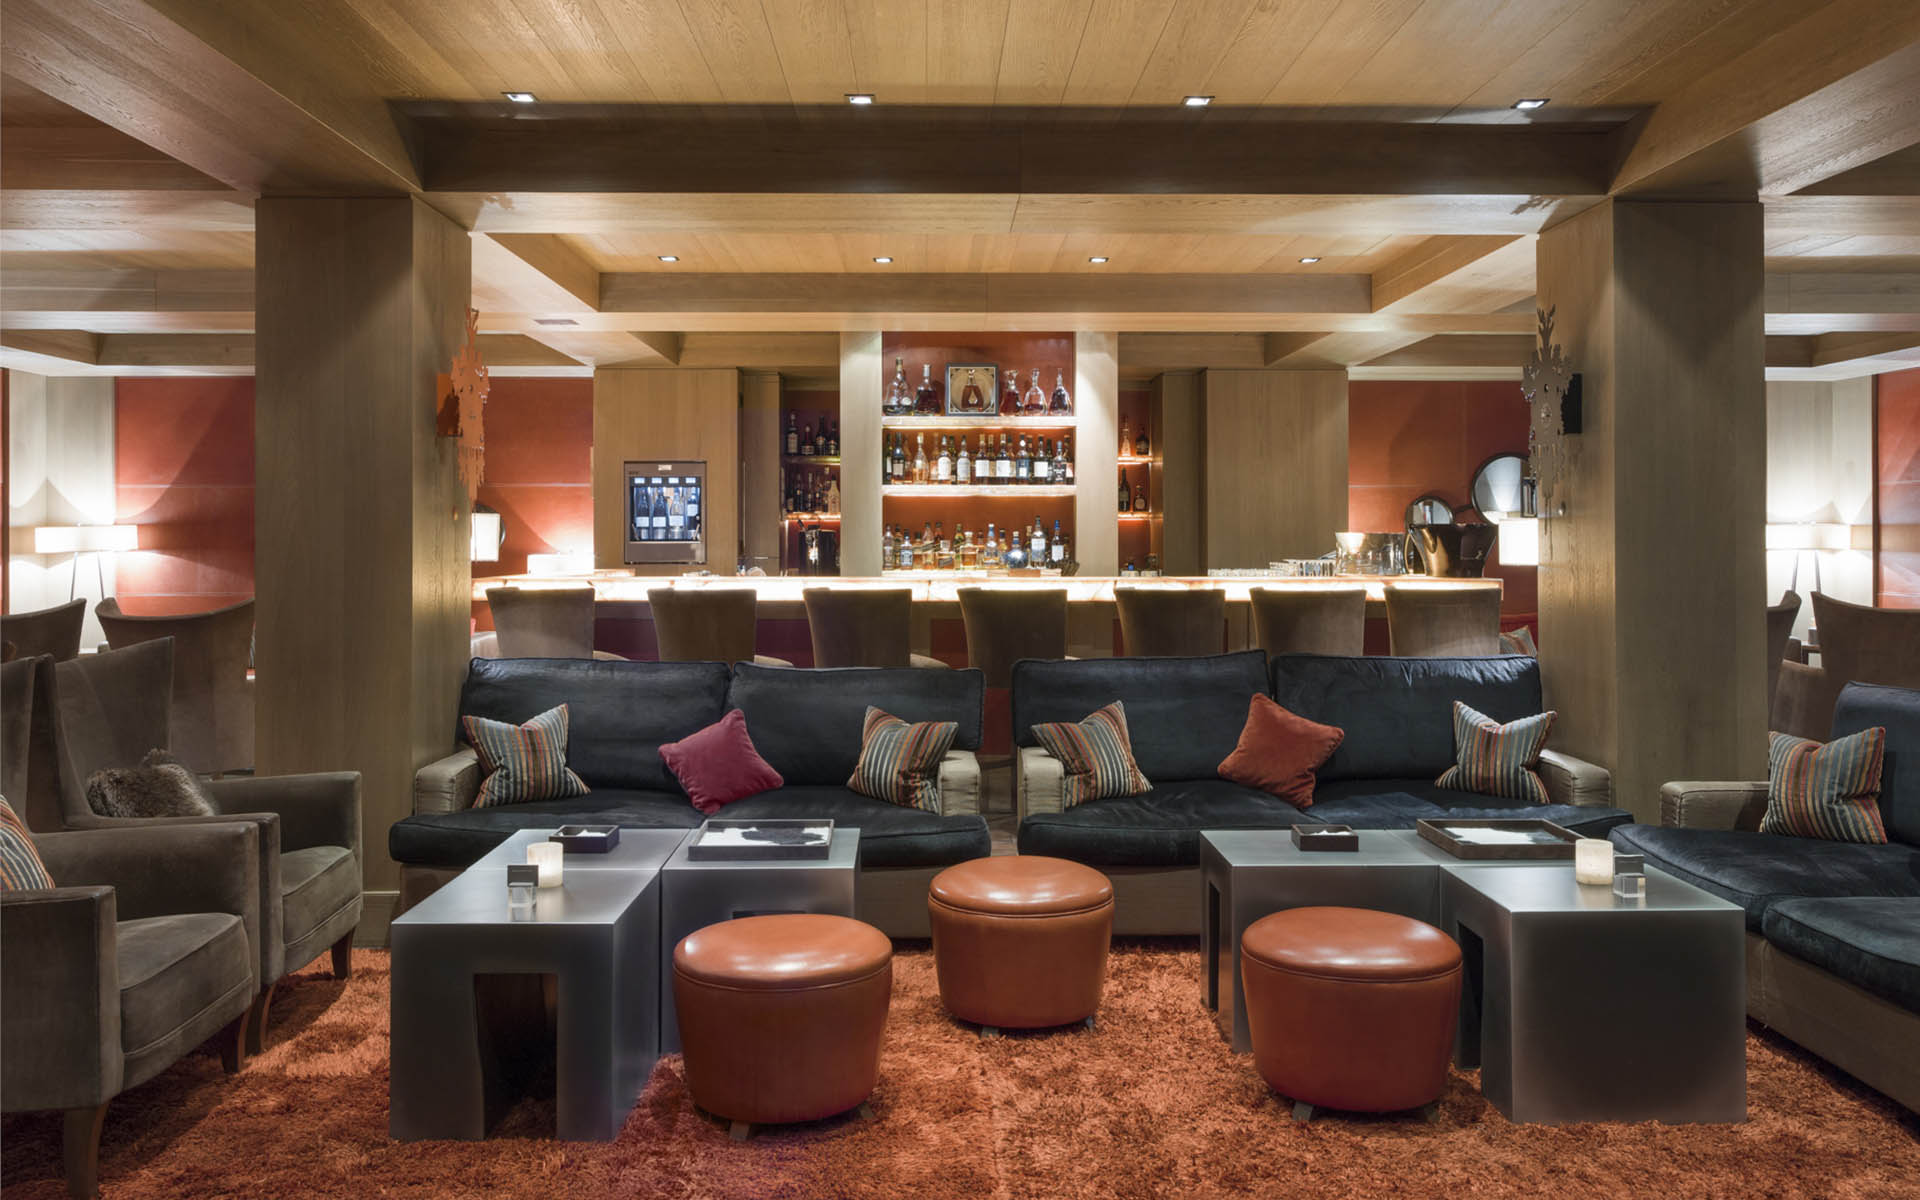 Hotel Le Cheval Blanc, Courchevel 1850 - Firefly Collection